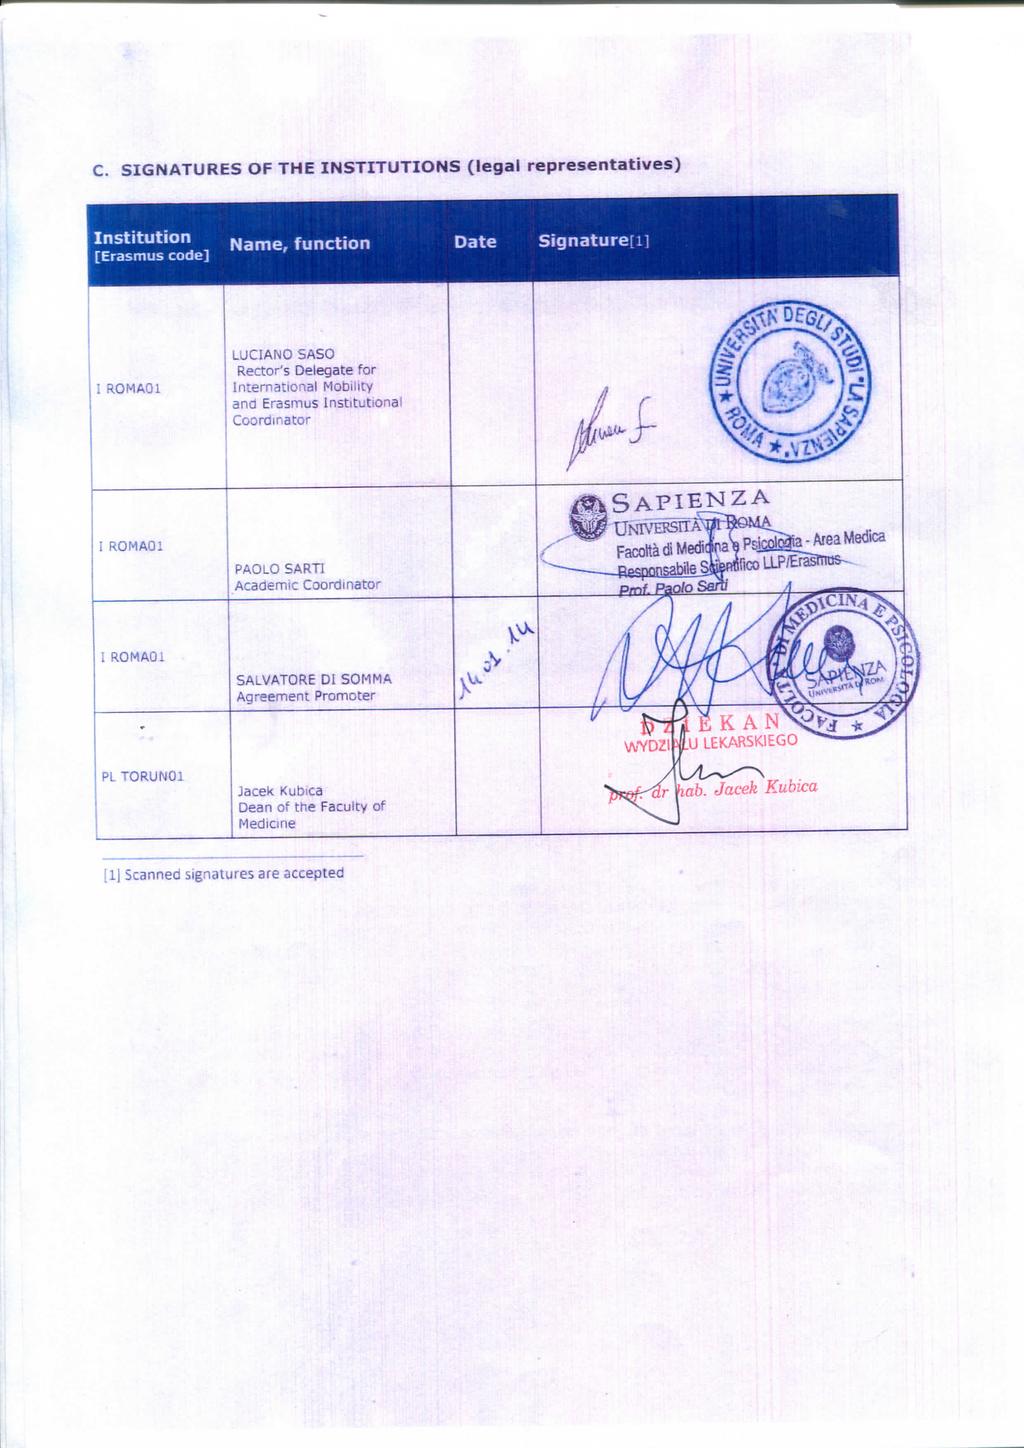 C. SIGNATURES OF THE INSTITUTIONS (legal representatives) Institution Name, function Date Signature ; ROMAOl LUCIANO SASO Rector's Delegate for International Mobility and Erasmus Institutional